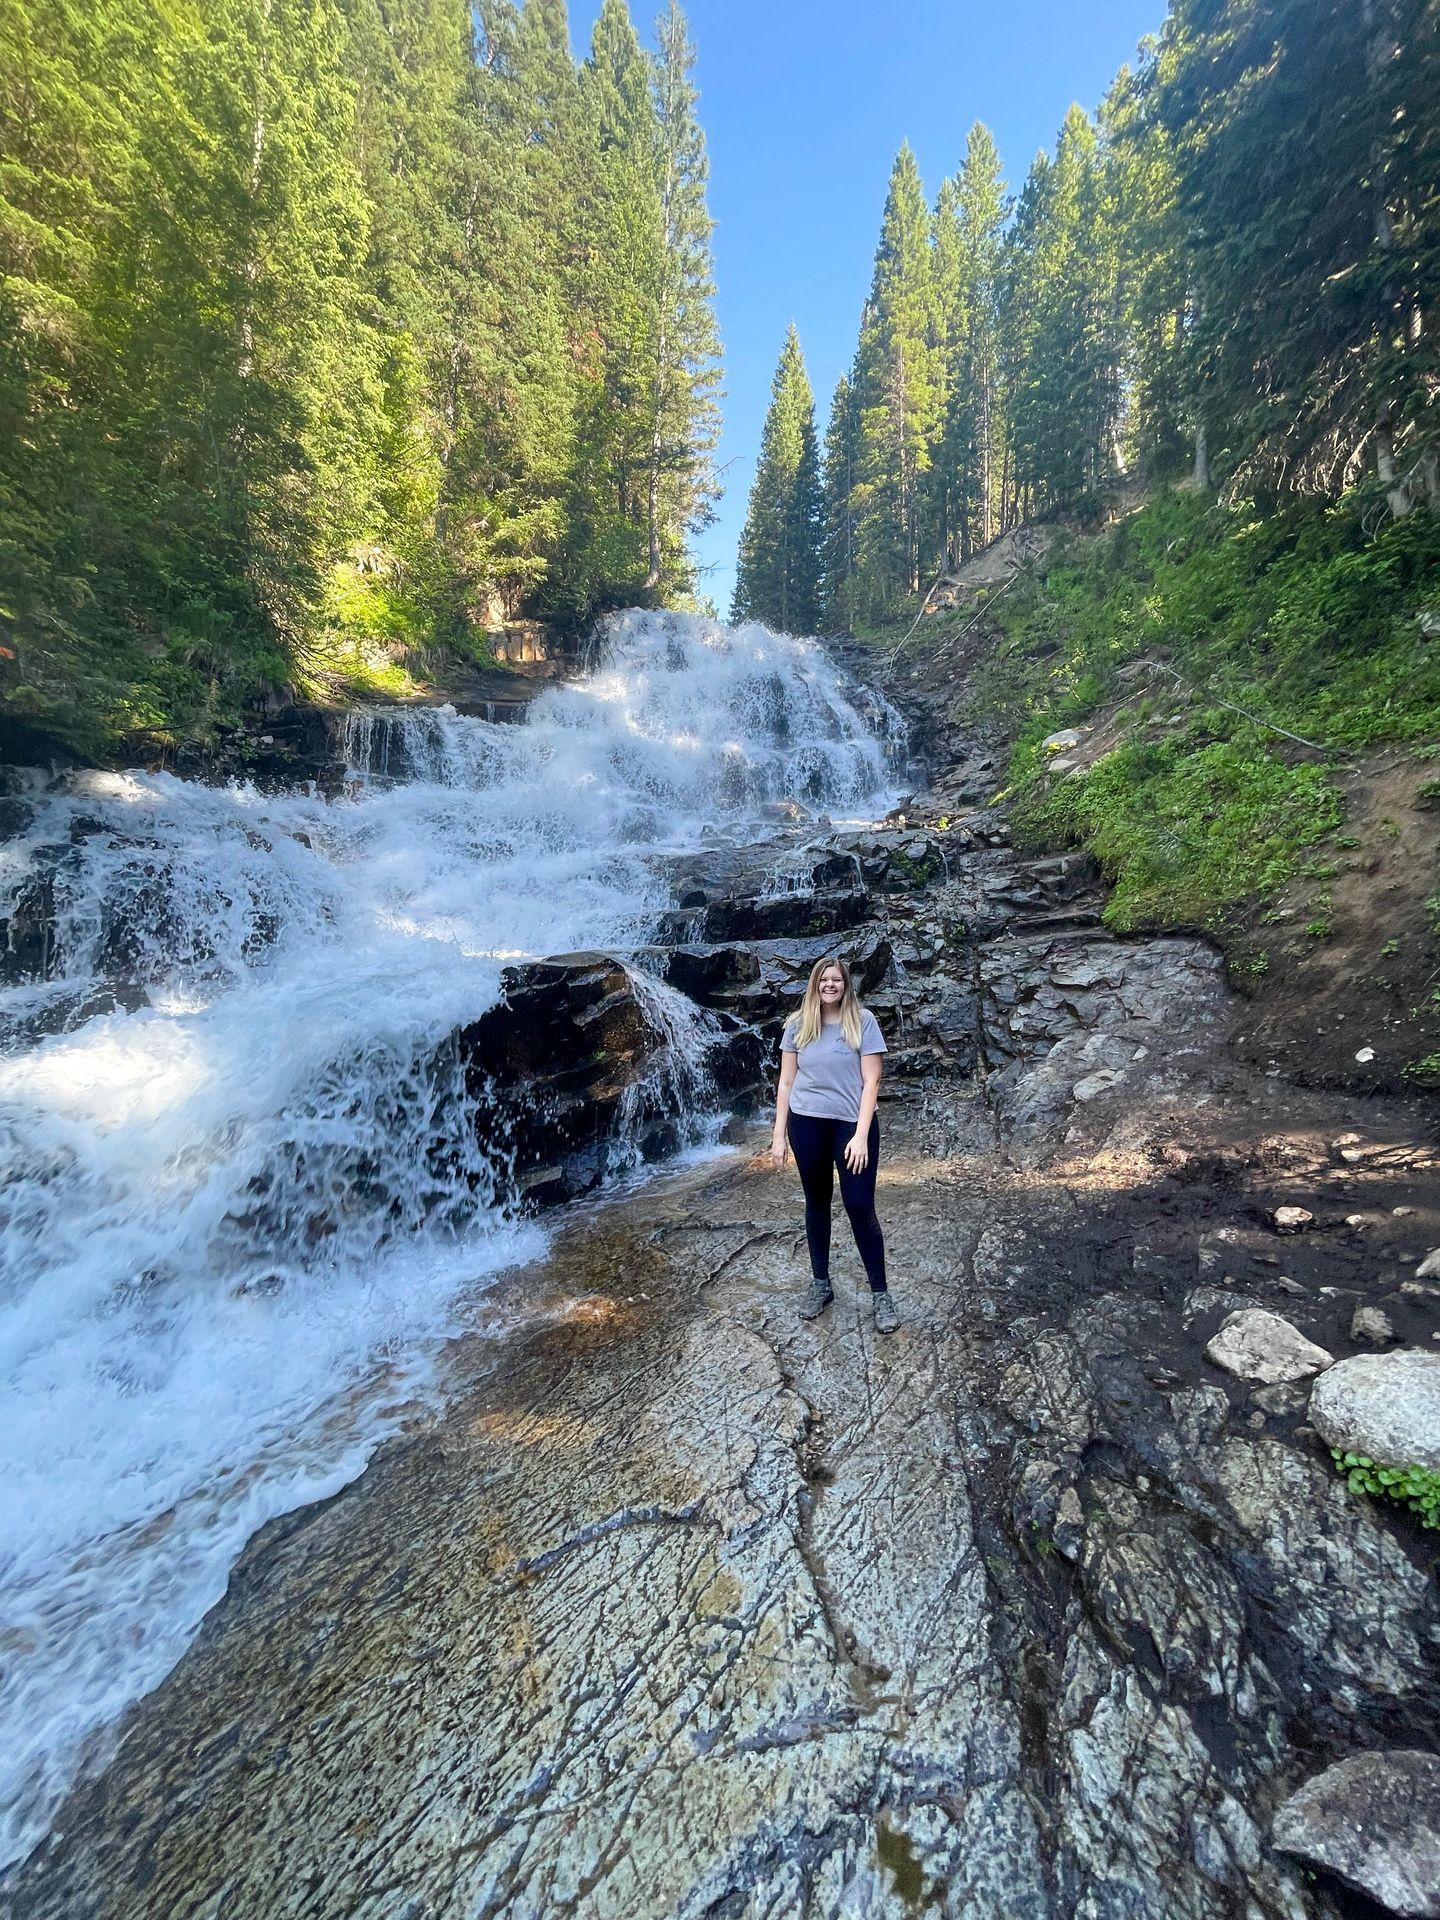 Lydia standing in front of a waterfall surrounded by green trees.